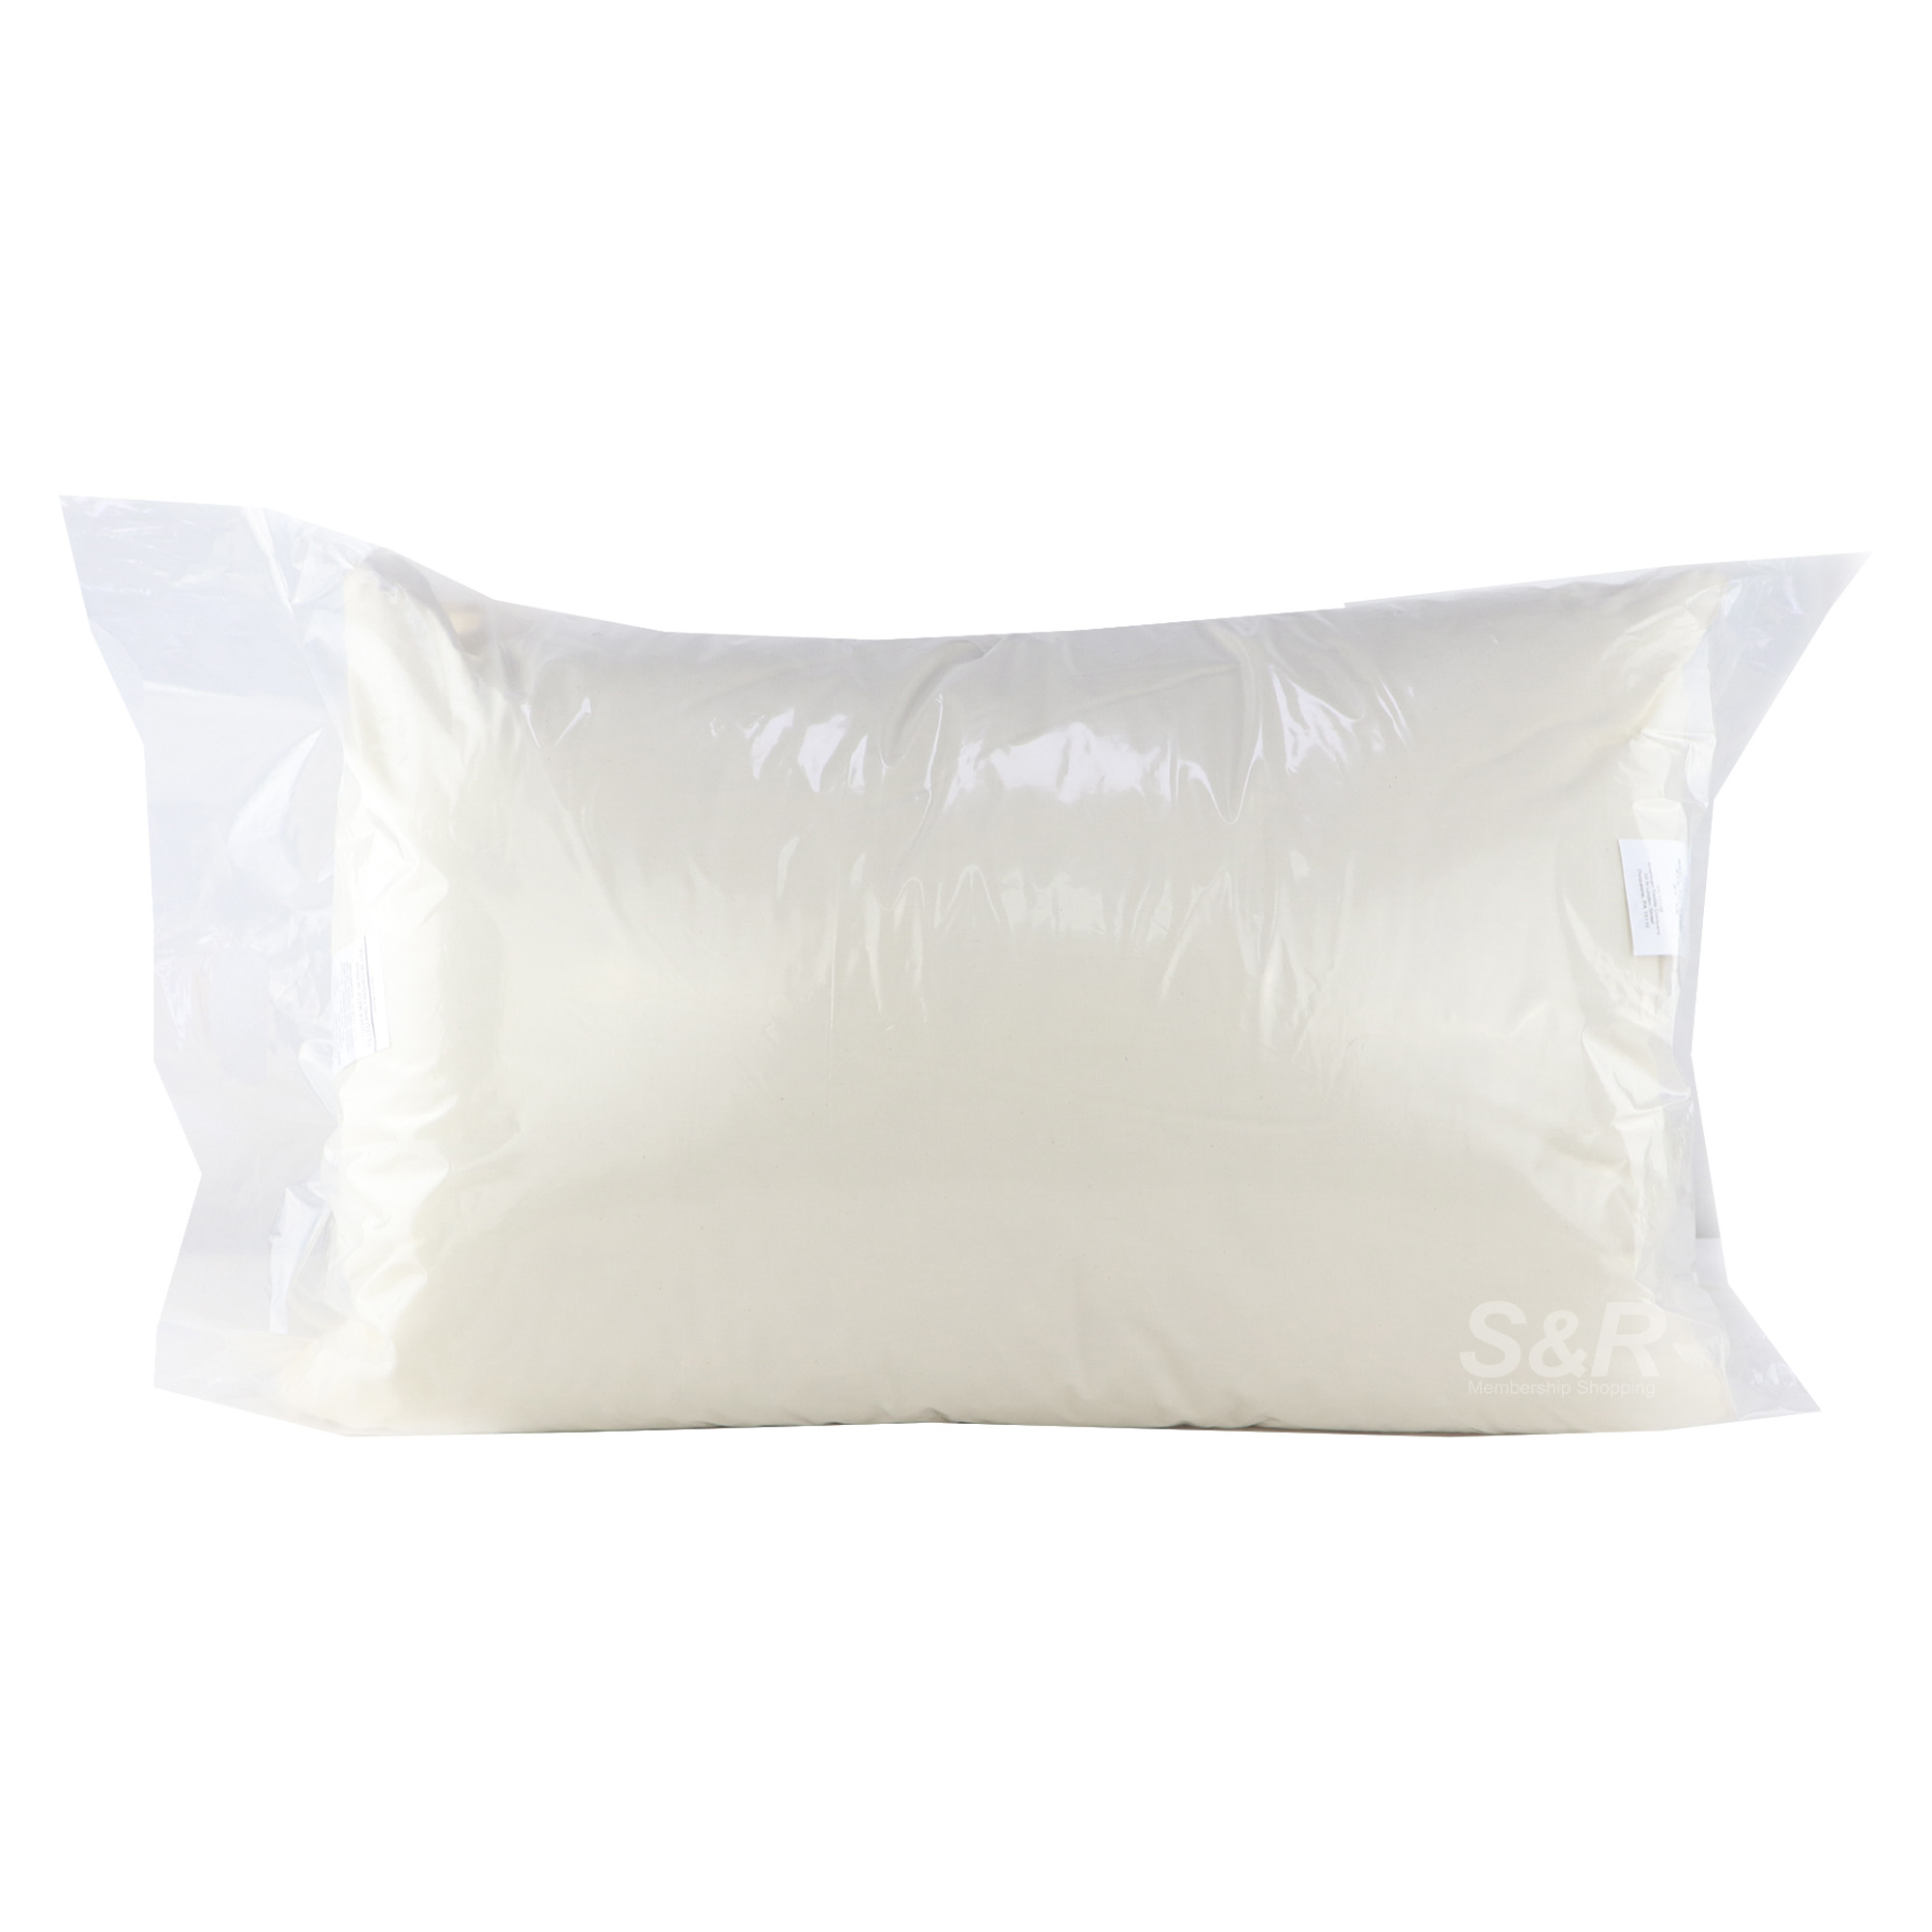 Allergy Protection Pillow